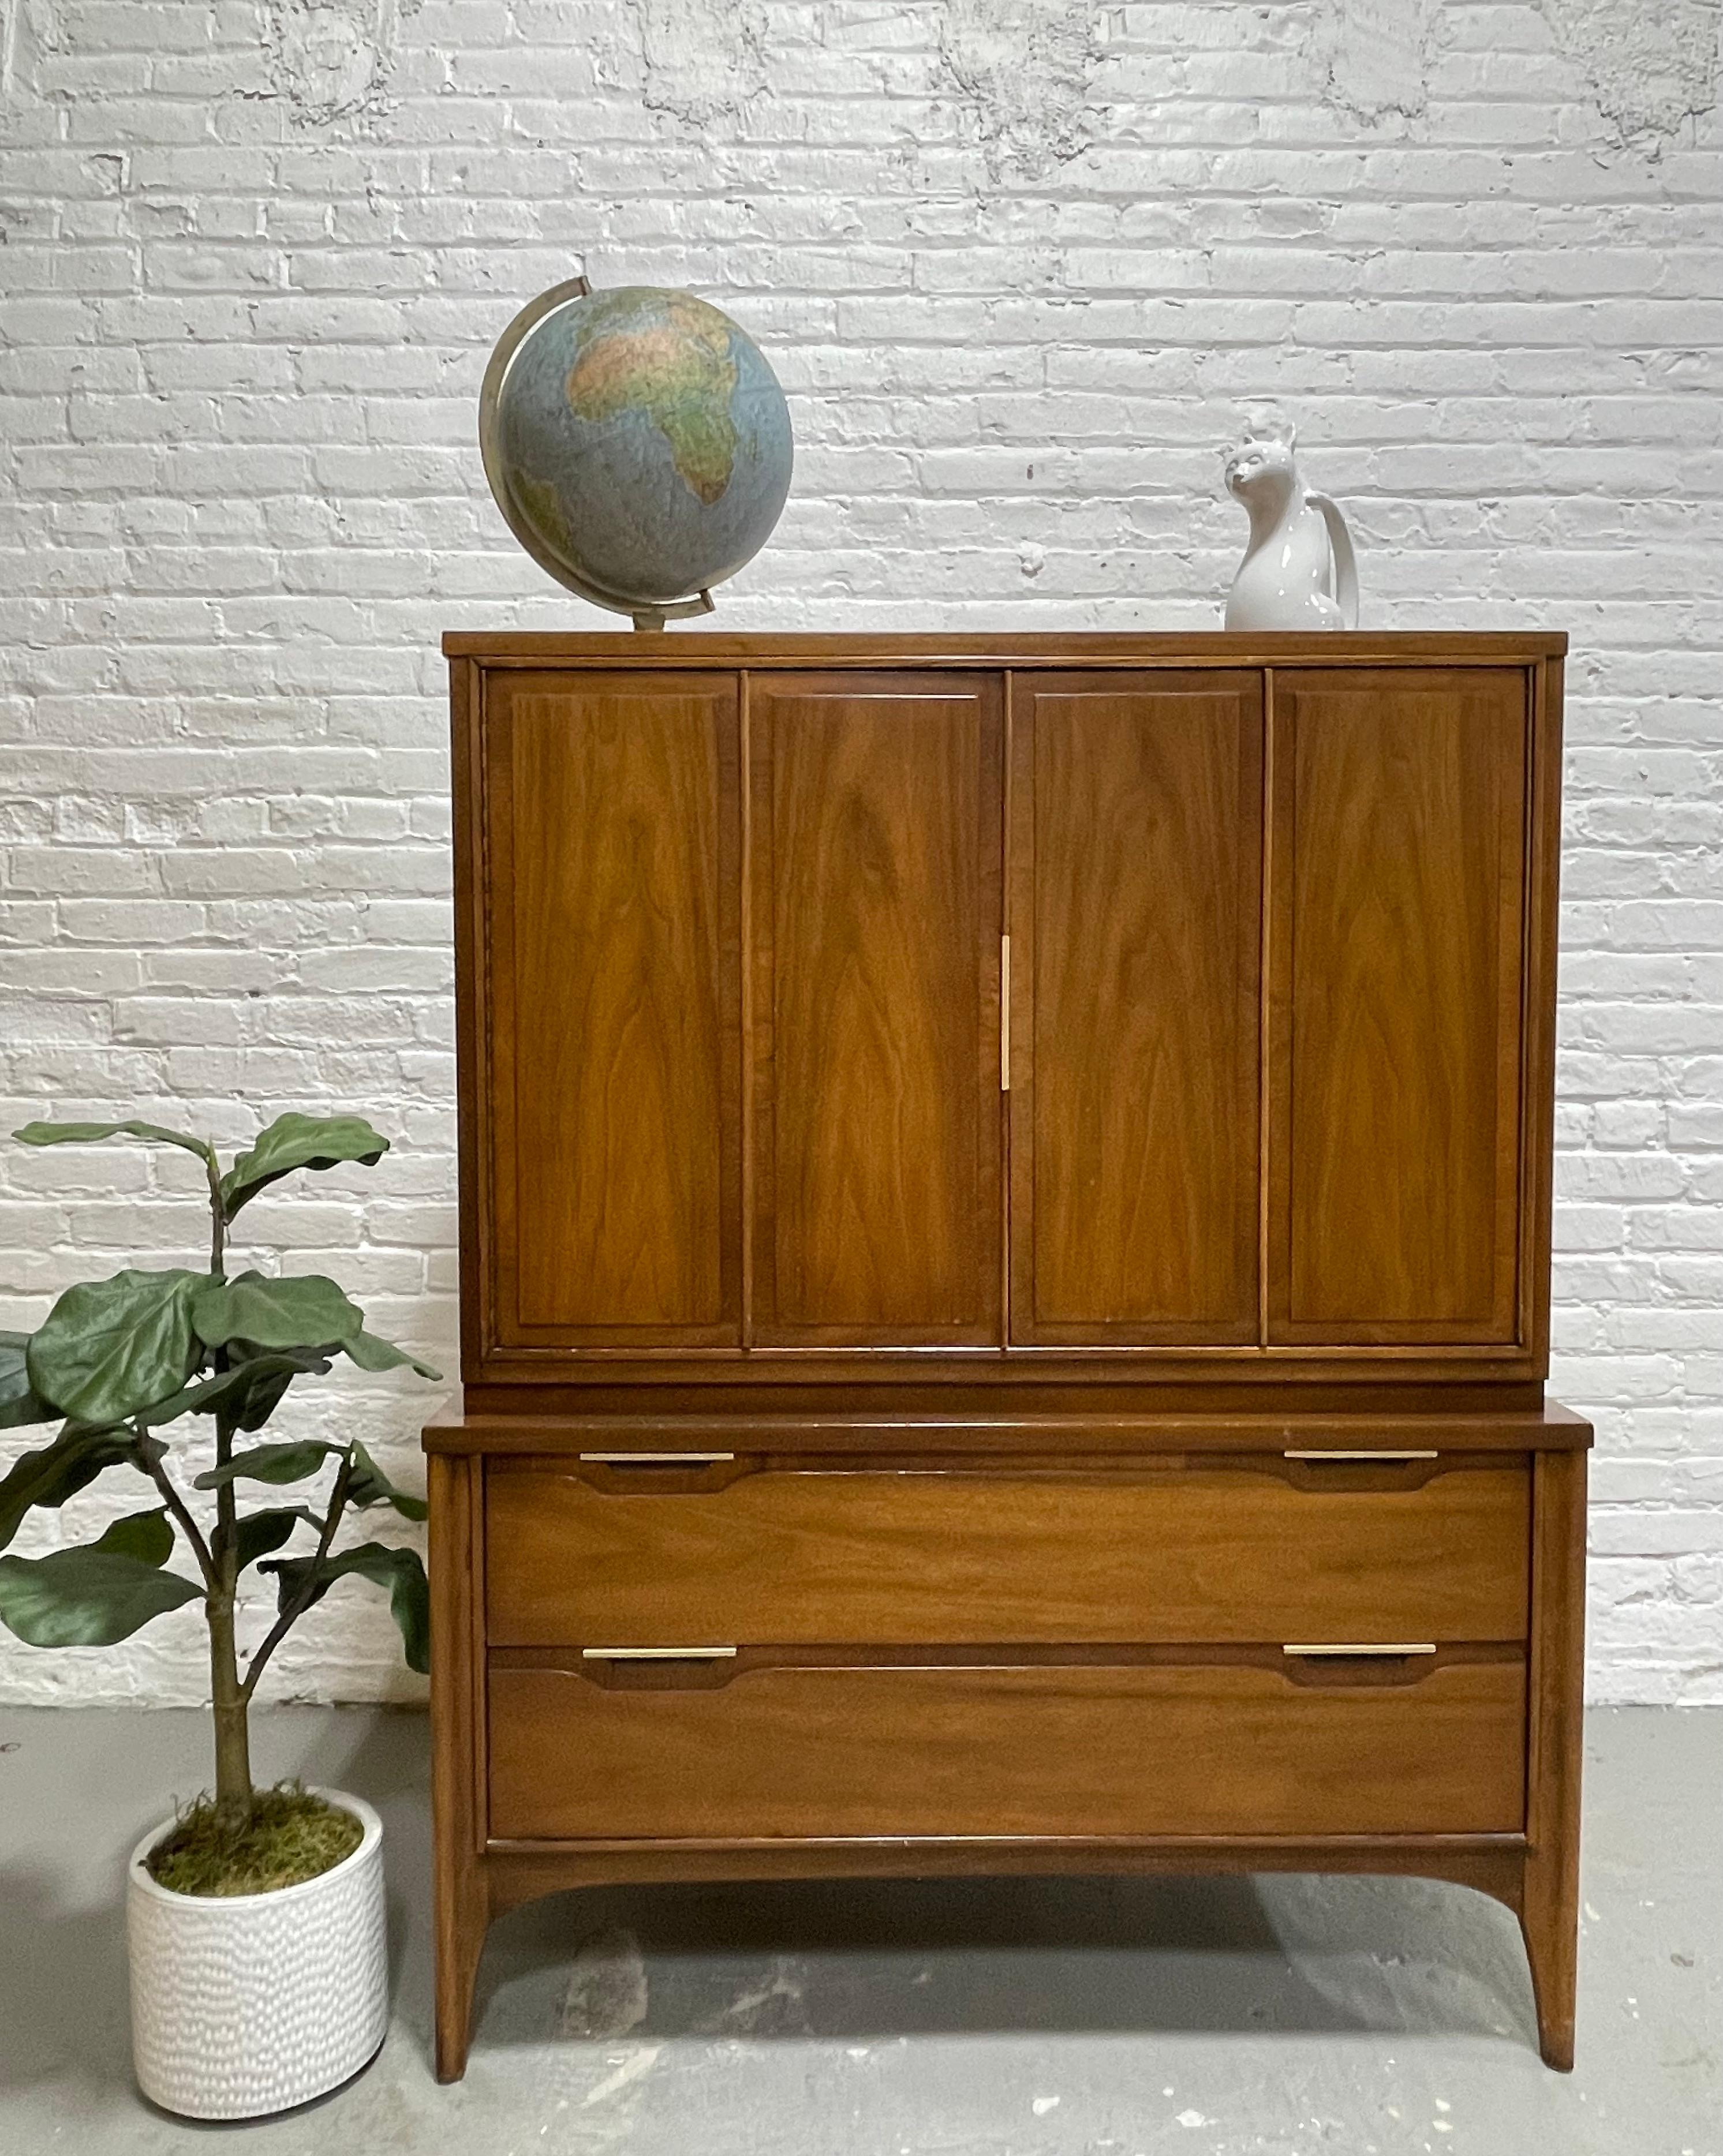 Mid-Century Modern Walnut Dresser / Highboy by Kent Coffey's Impact line, circa 1960s. Gorgeous wood grains with metal trim along the handpulls, top doors that open on piano hinges to reveal a wealth of storage. If you need one piece to hold